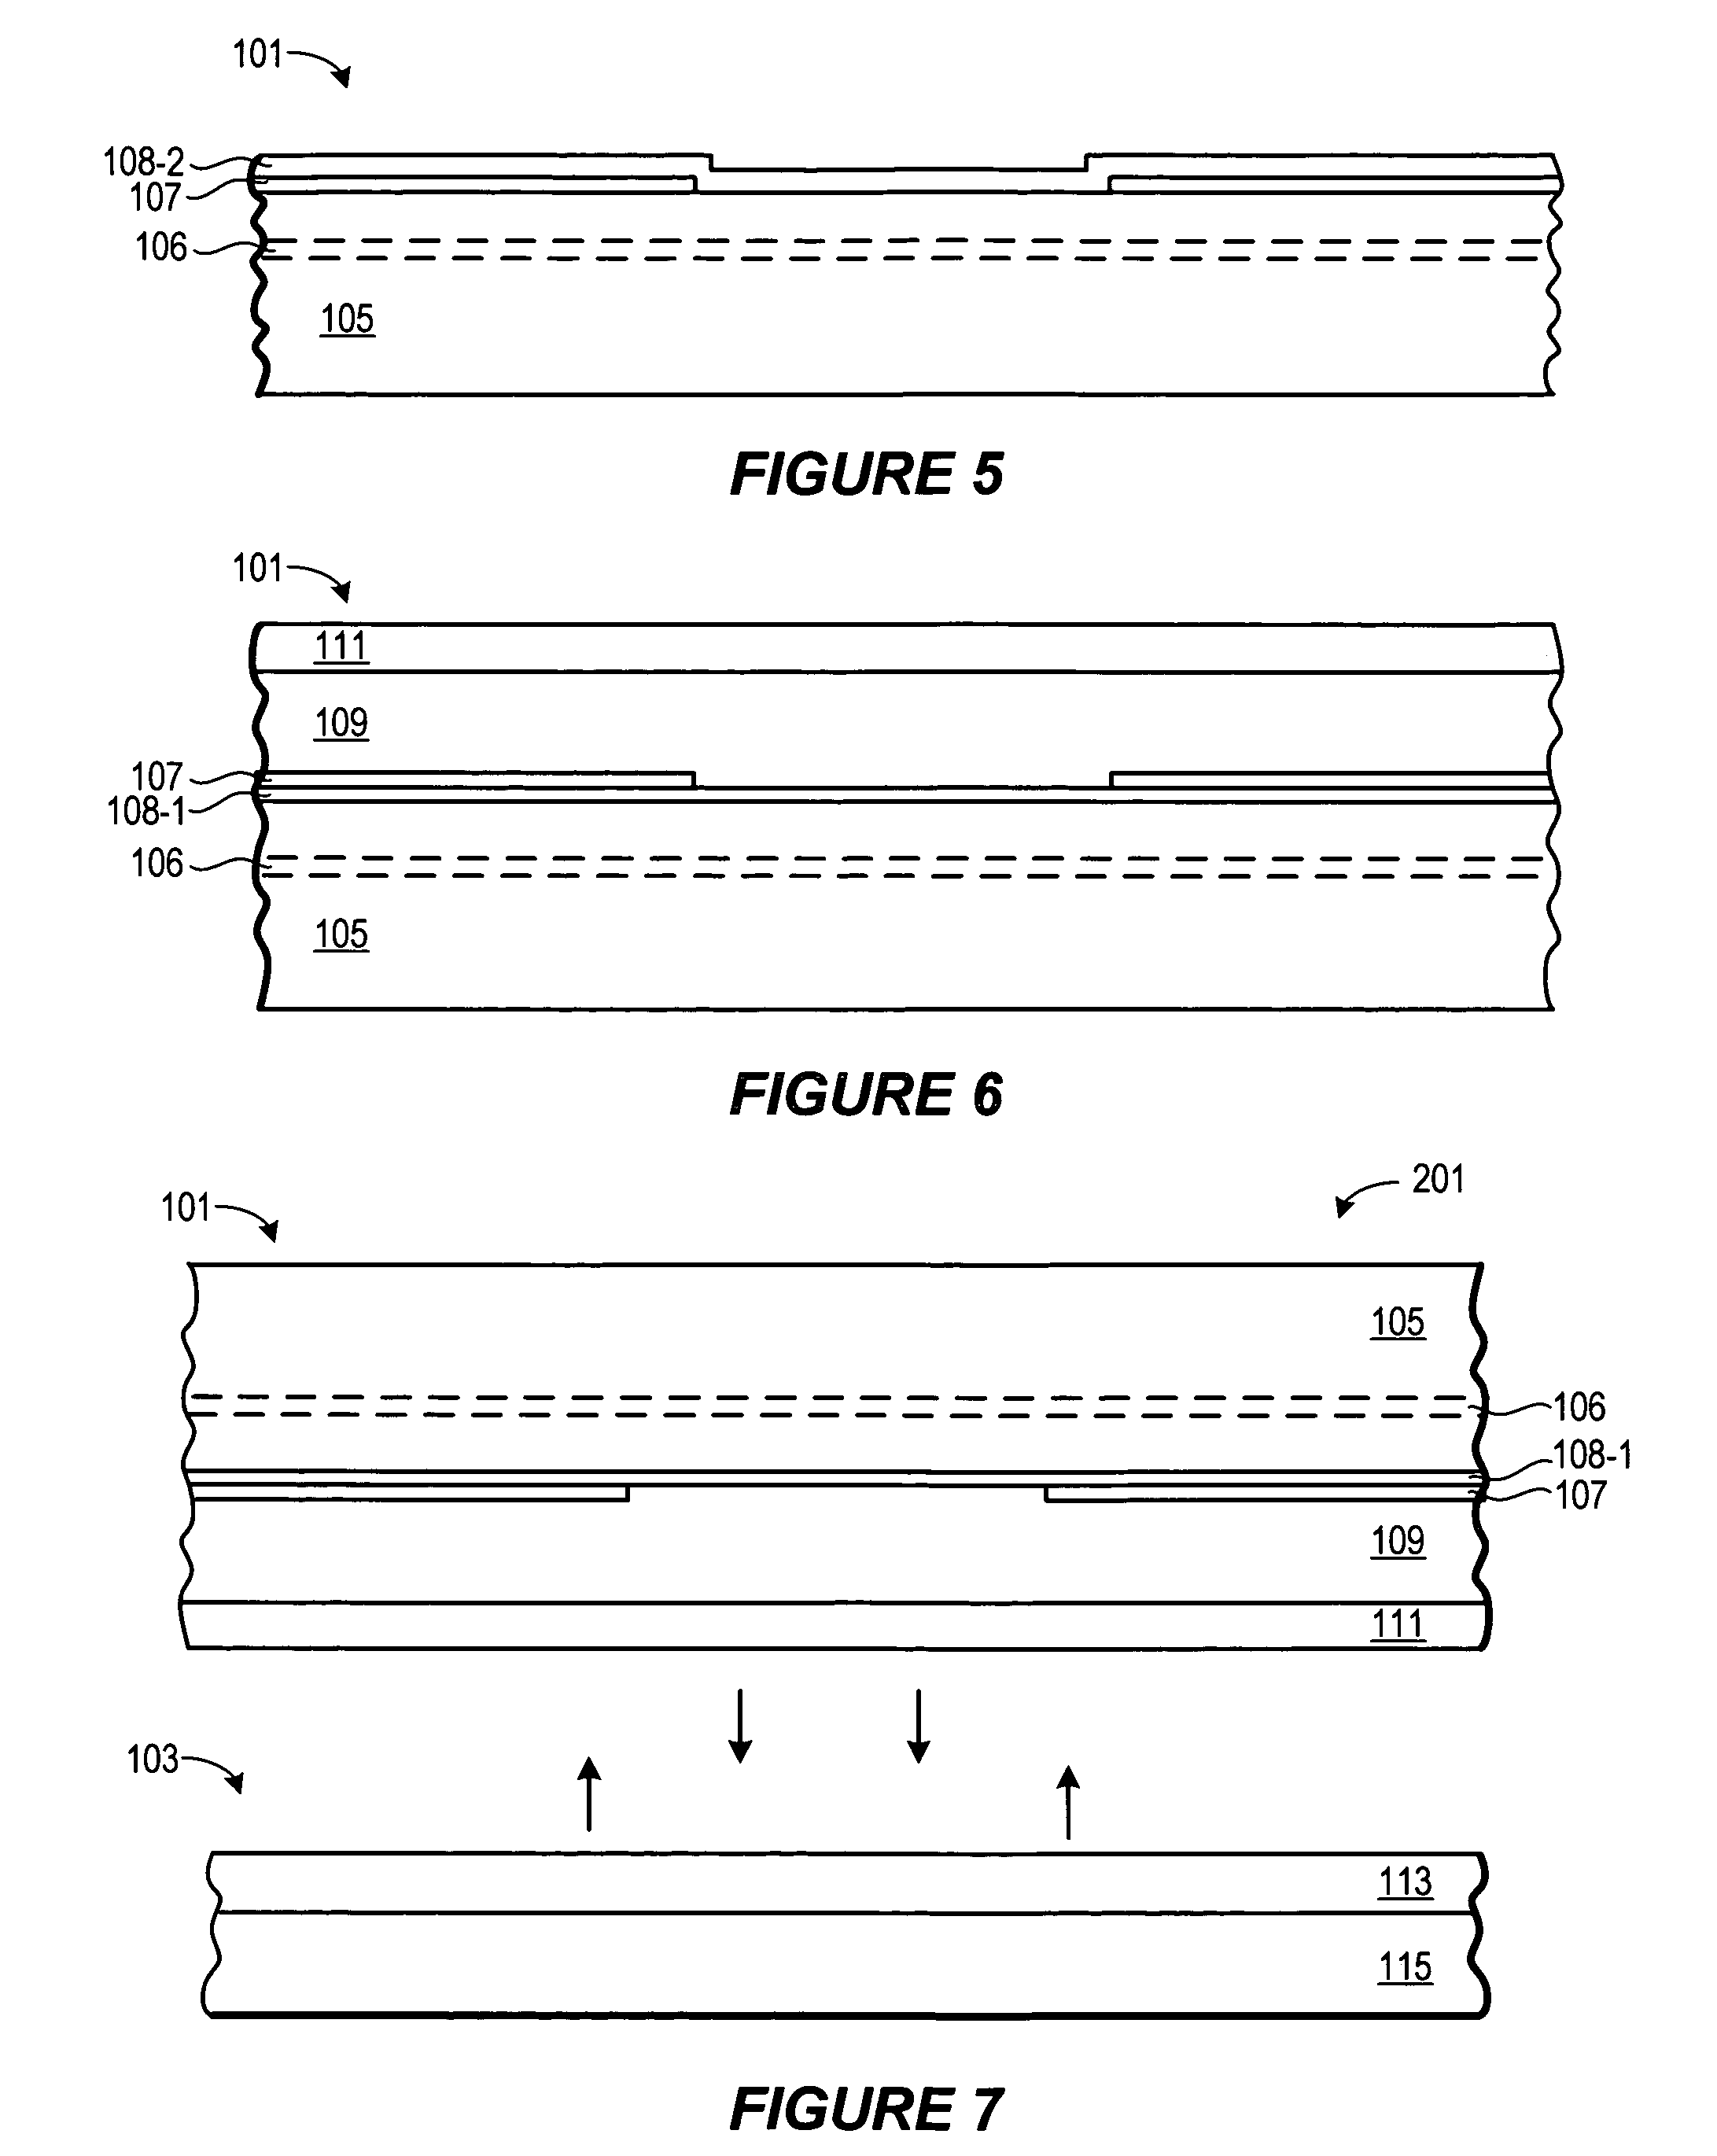 Method of forming double gate transistors having varying gate dielectric thicknesses